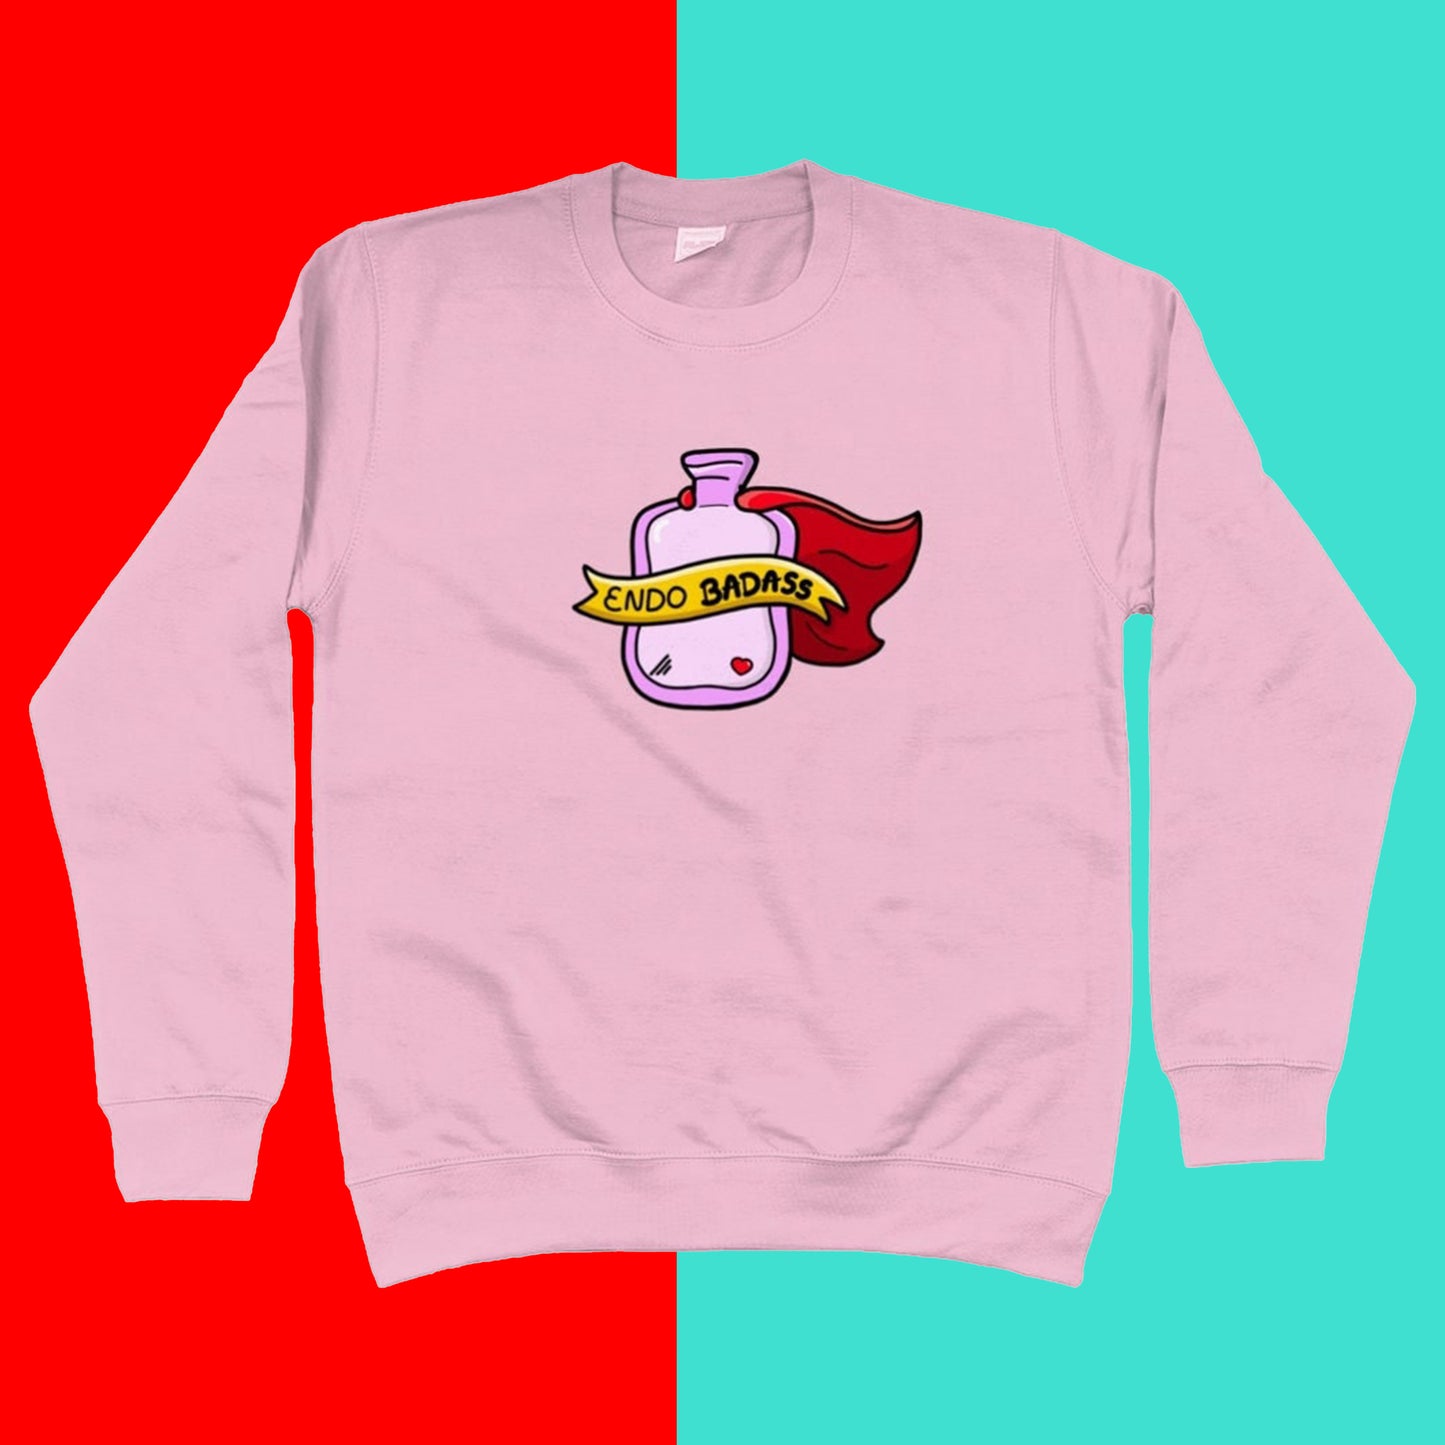 The Endo Badass Sweater - Endometriosis on a red and blue background. A pastel bubblegum baby pink sweatshirt jumper with a pink hot waterbottle with a small red heart, red cape and yellow banner reading 'endo badass' in black text. The hand drawn design is raising awareness for endometriosis and pelvic pain.